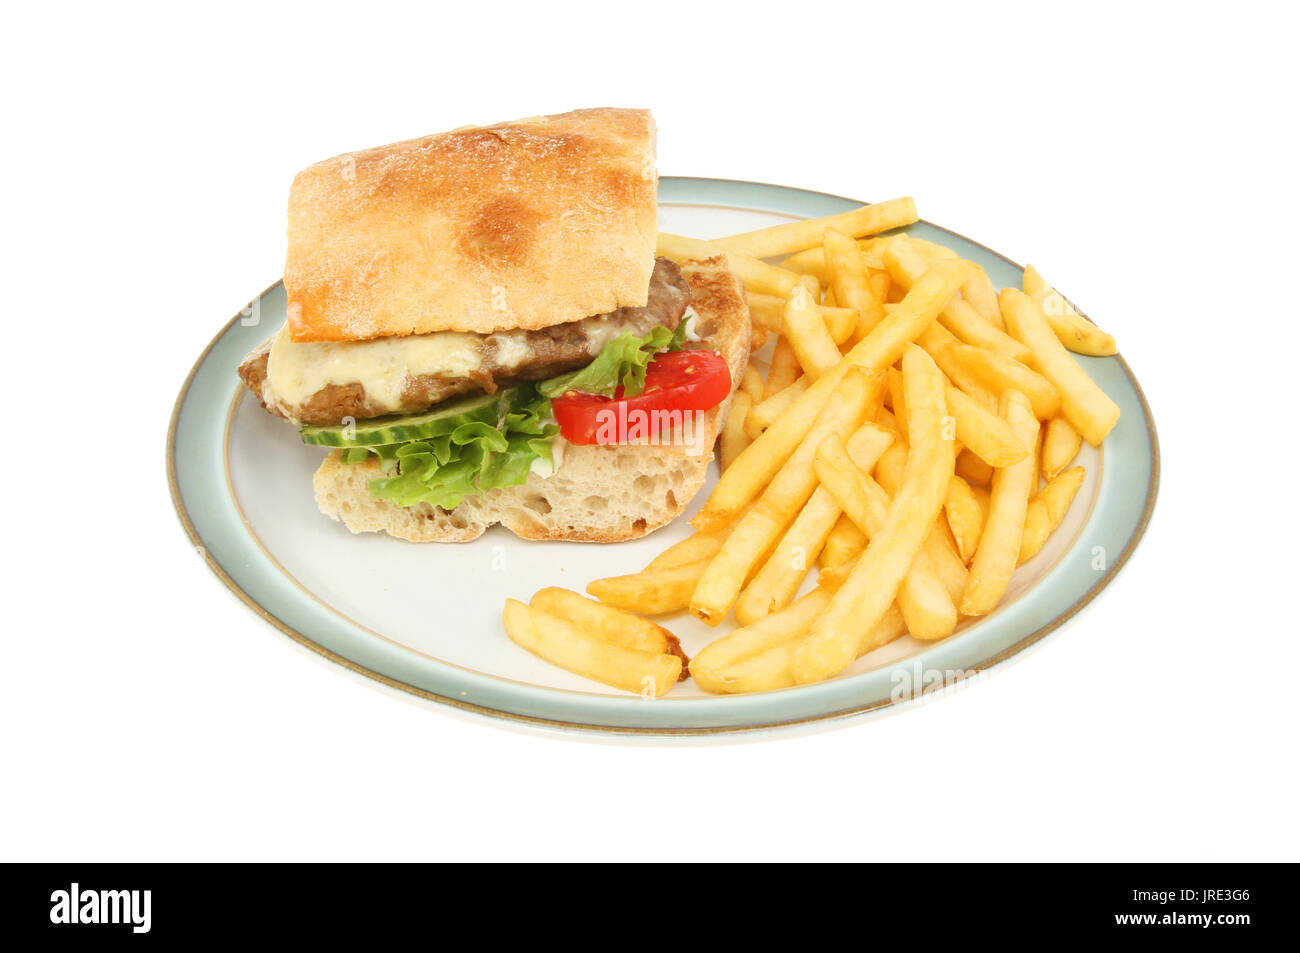 Cheeseburger in a ciabatta roll with fries on a plate isolated against white Stock Photo